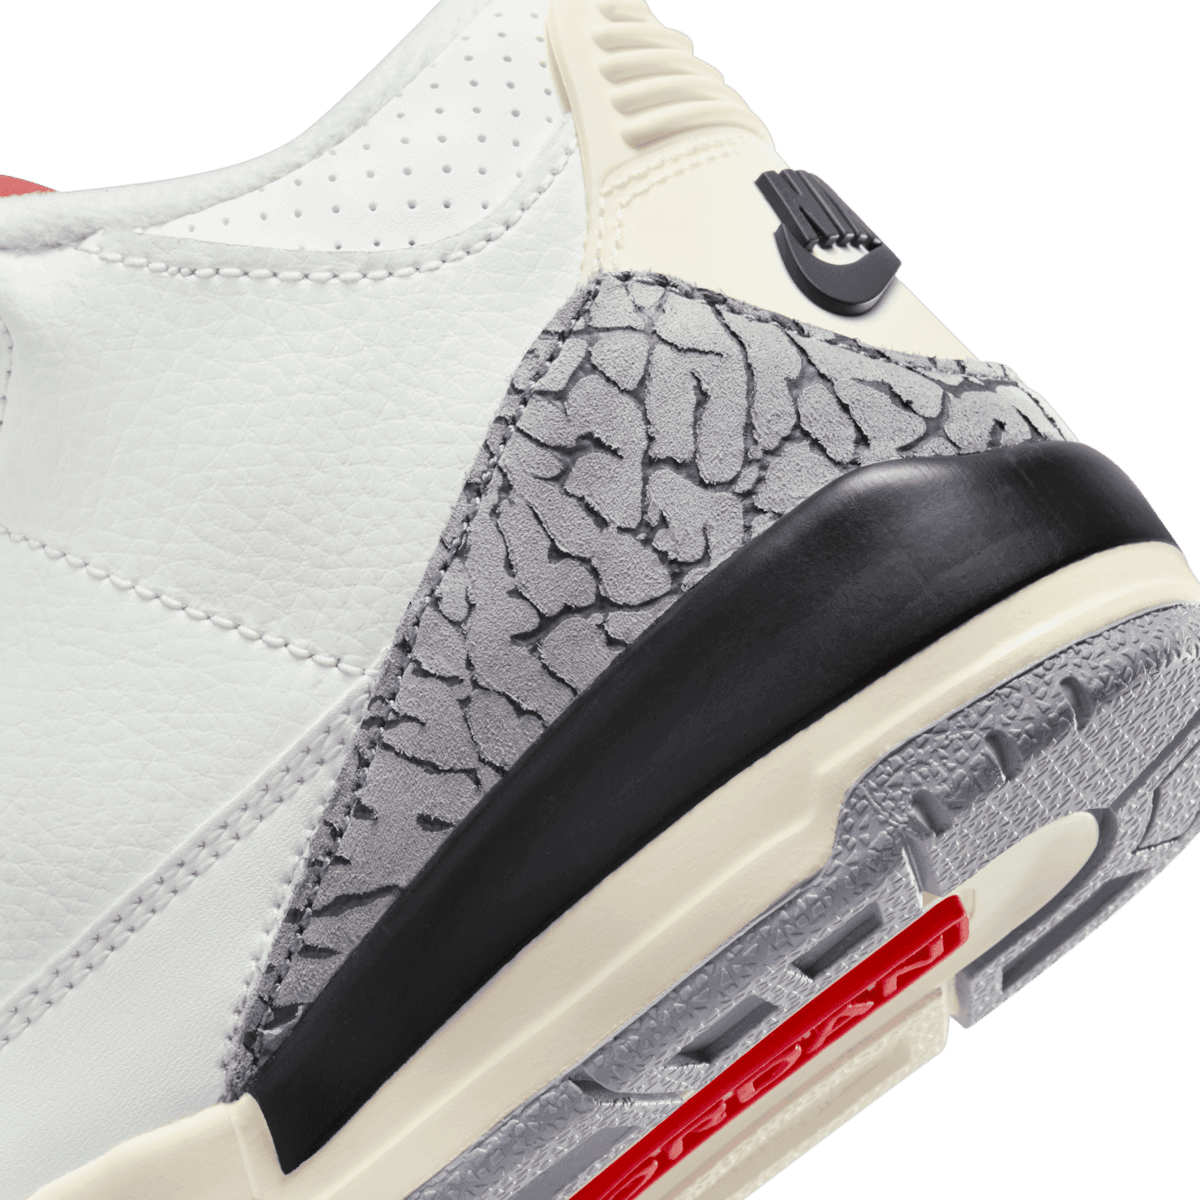 Air Jordan 3 Reimagined White Cement (PS) Angle 5